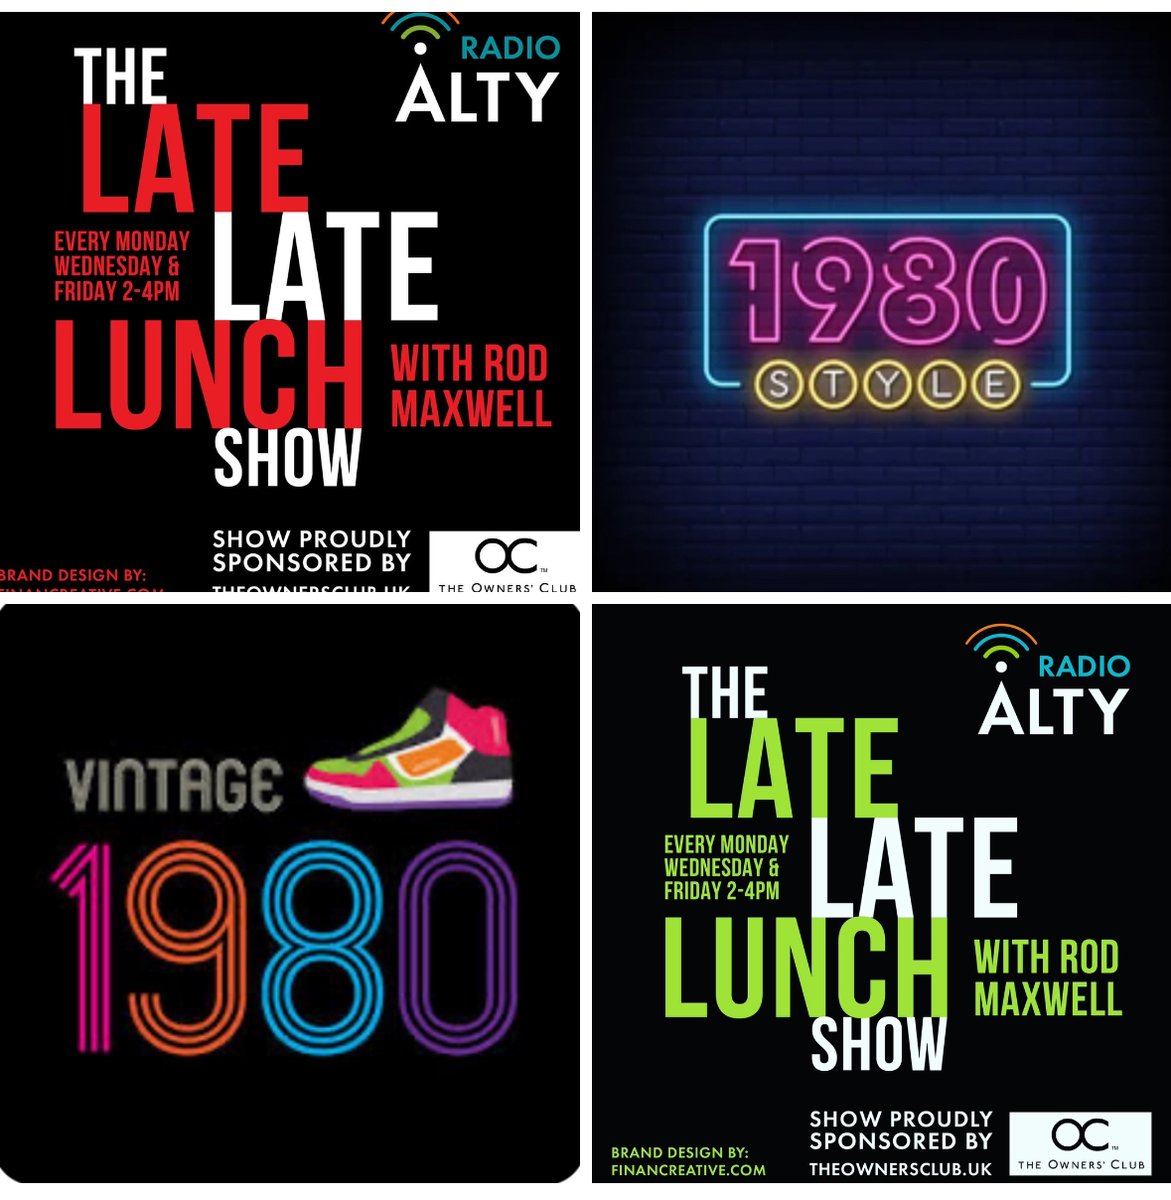 Today on RadioAlty.co.uk - #theLateLateLunchshow is going back to 1980 and playing some of the top 50 singles from that year. From Sheena to OMD, The Jam and Bowie - it was a mix bag of tracks and news. 2pm on RadioAlty.co.uk - online, apps, Alexa.